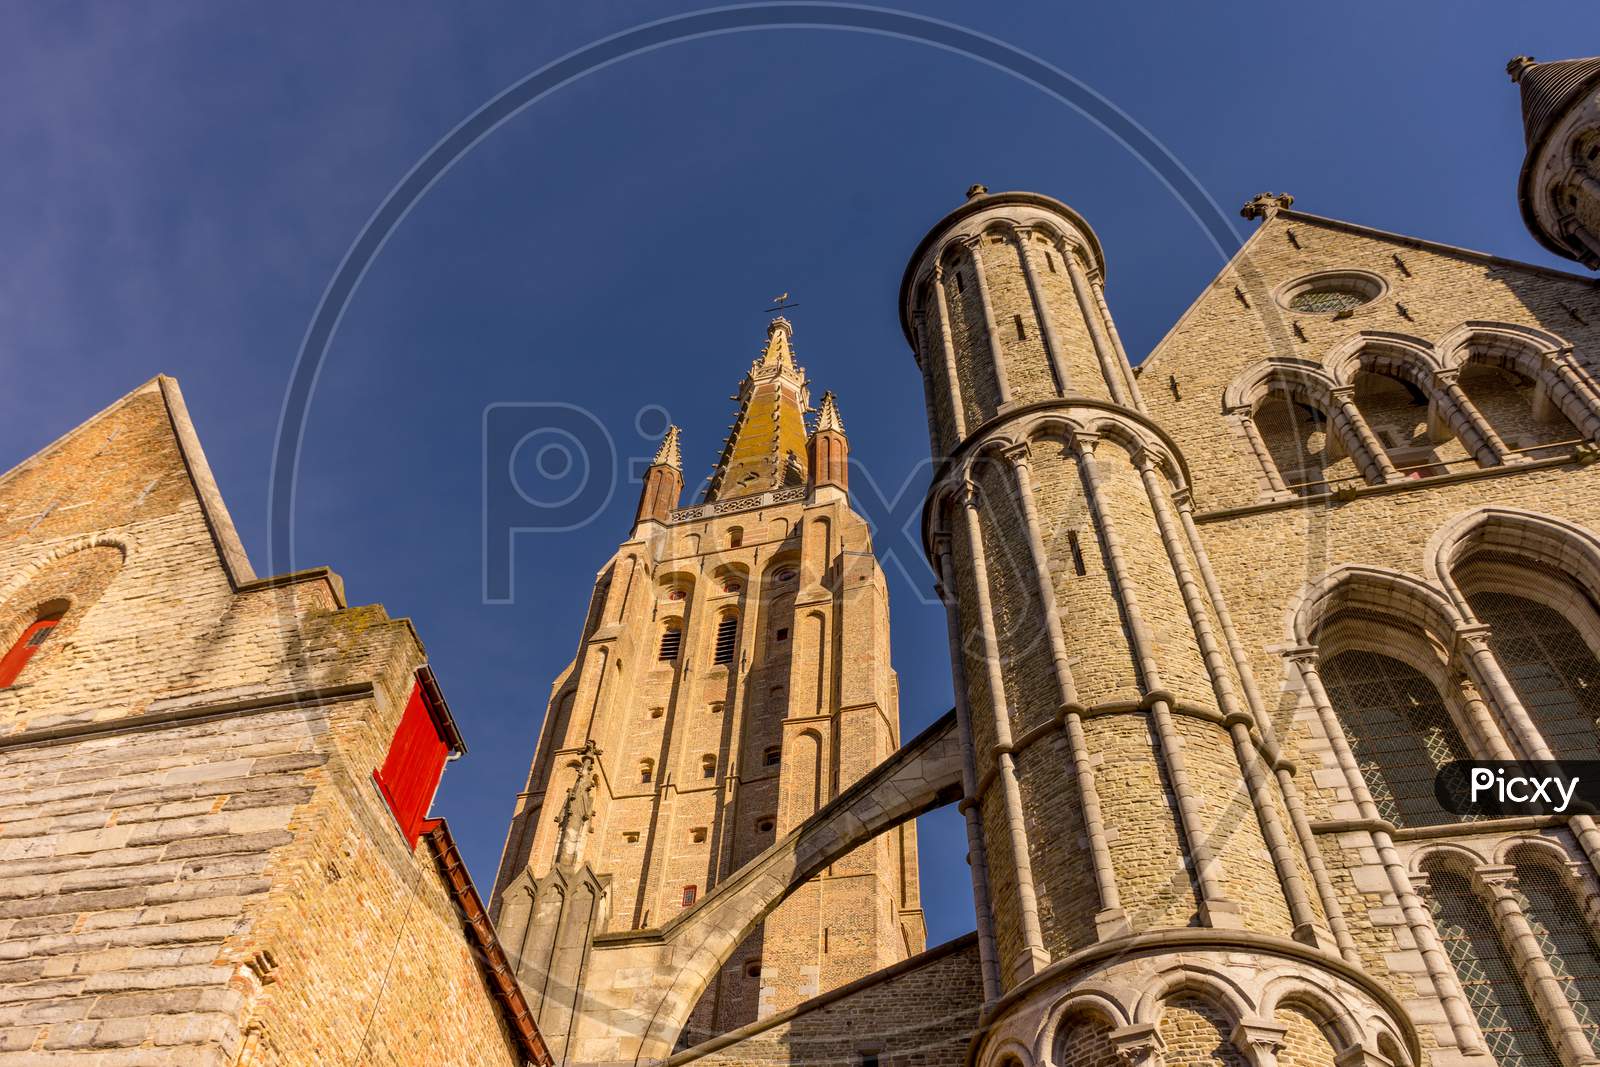 Bruges, Belgium - 17 February 2018: The Church Of Our Lady In Bruges, Belgium